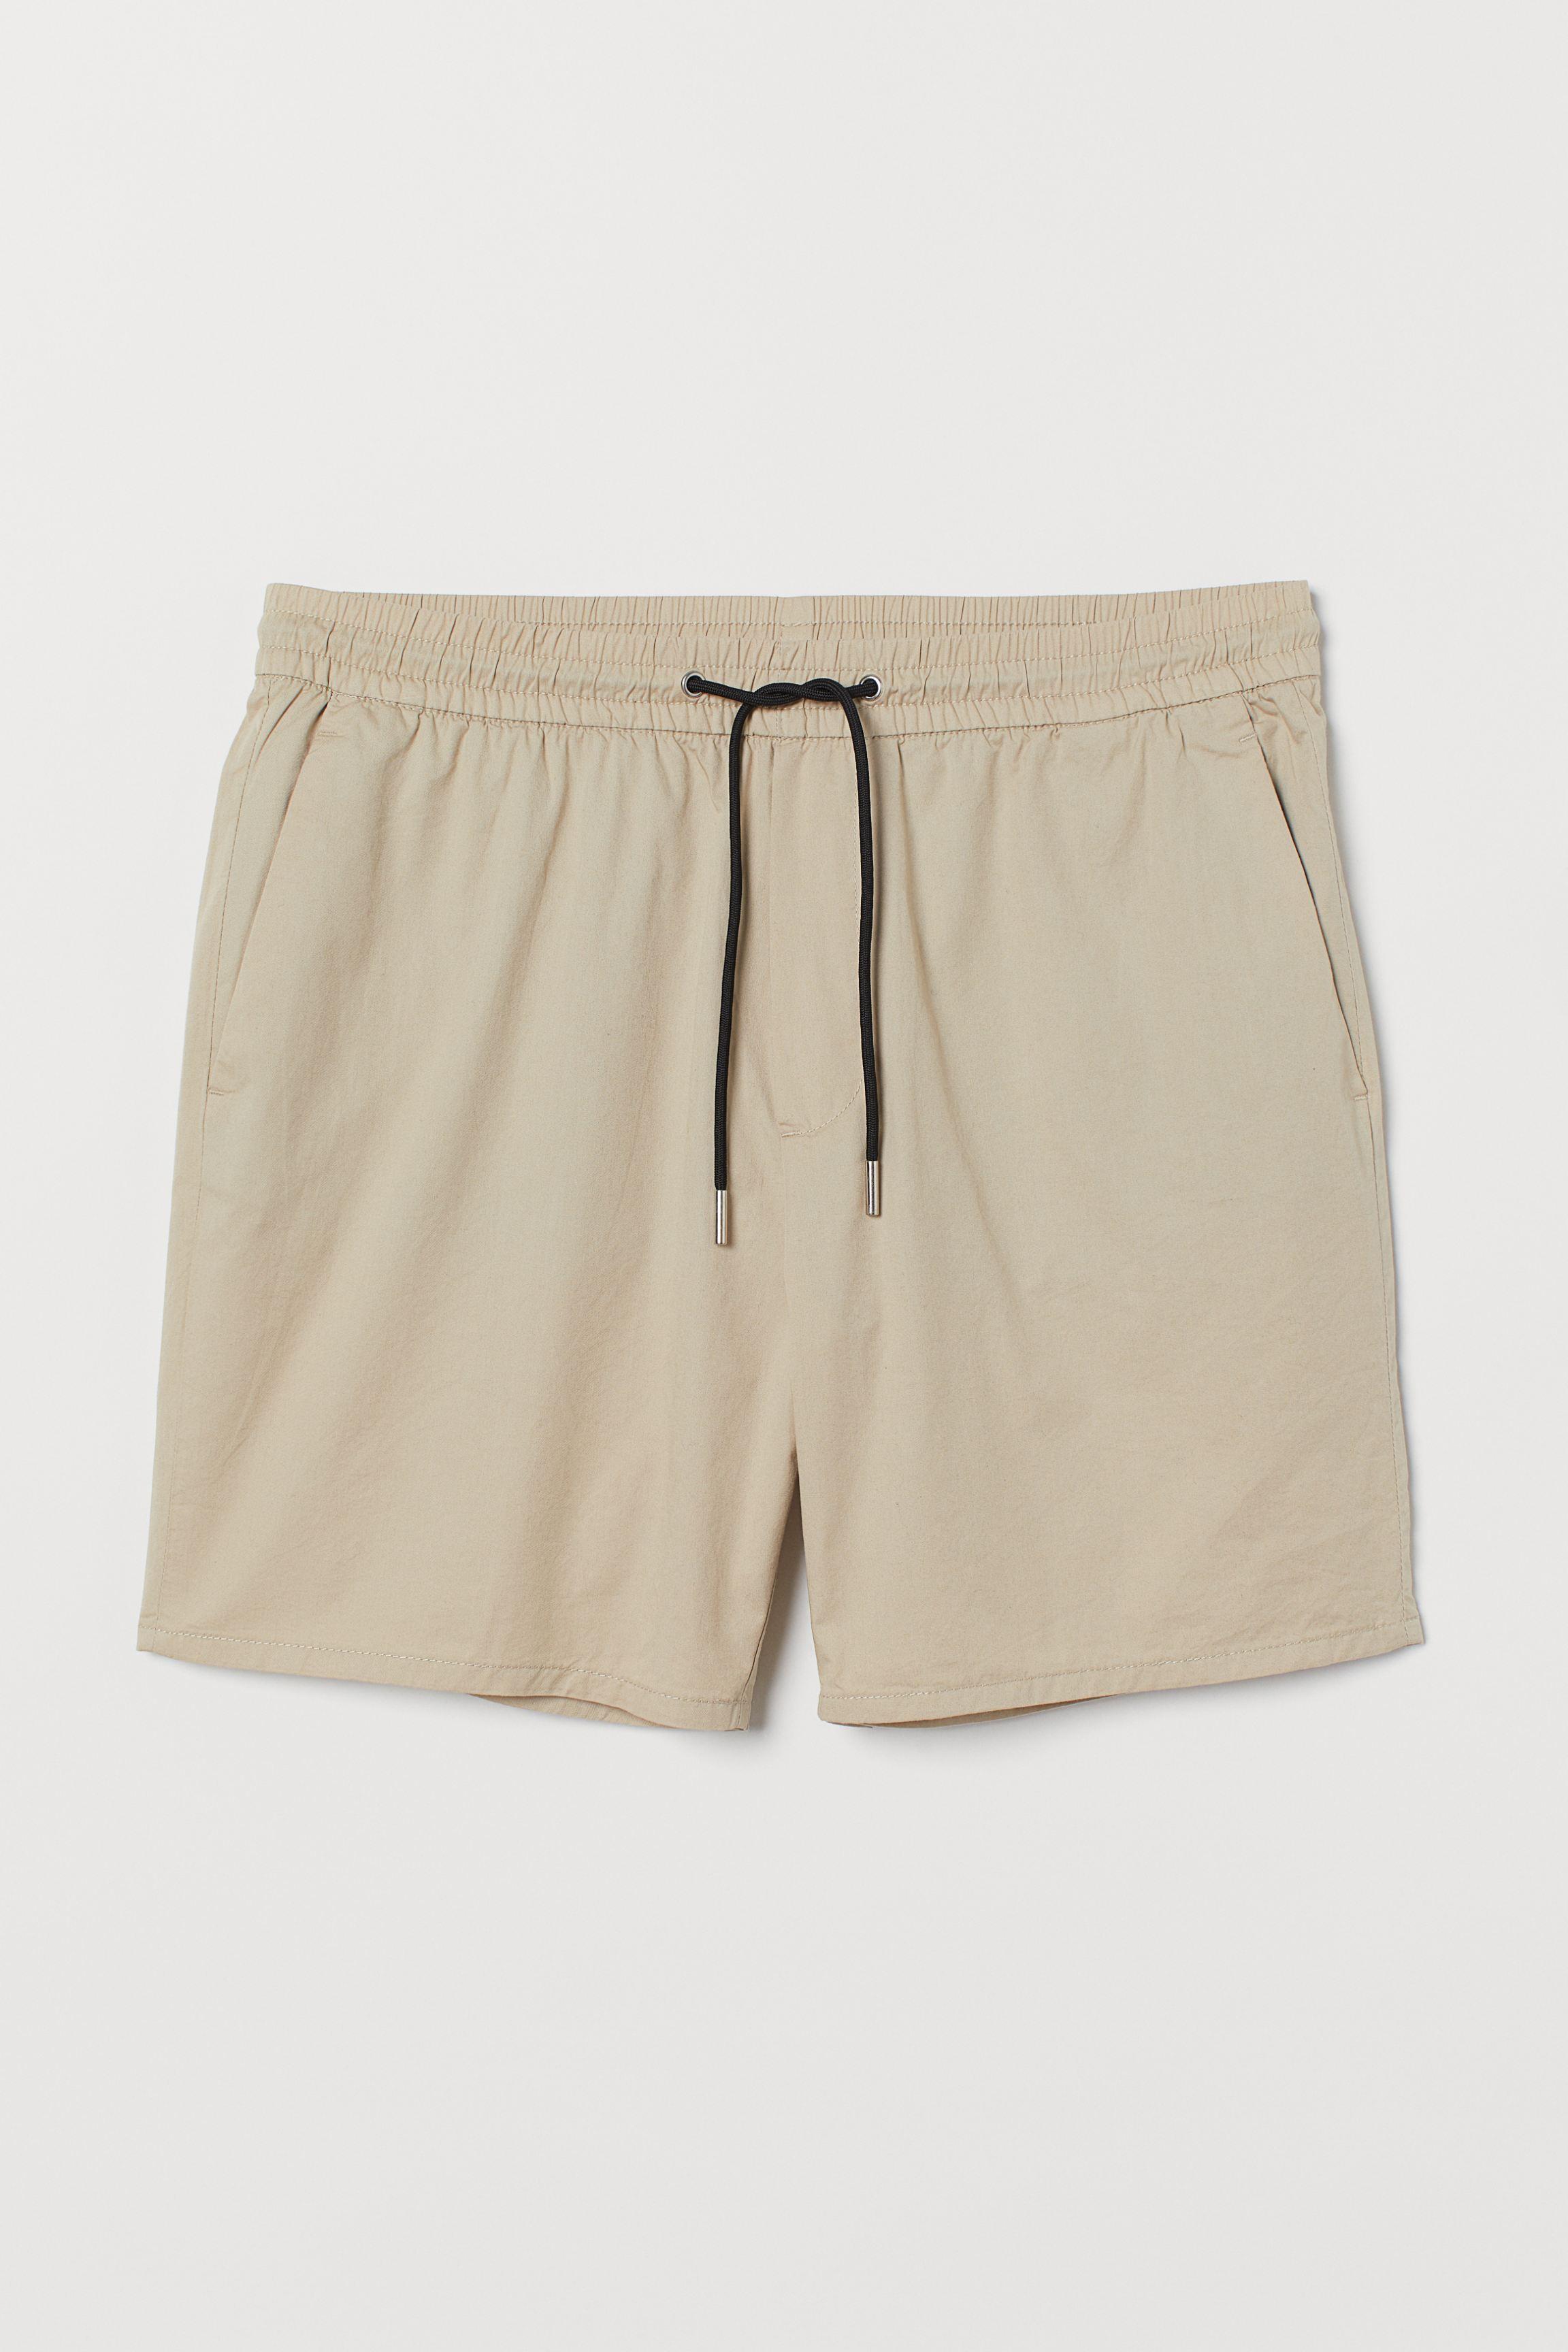 H&m Men's Slim Fit Shorts | International Society of Precision Agriculture